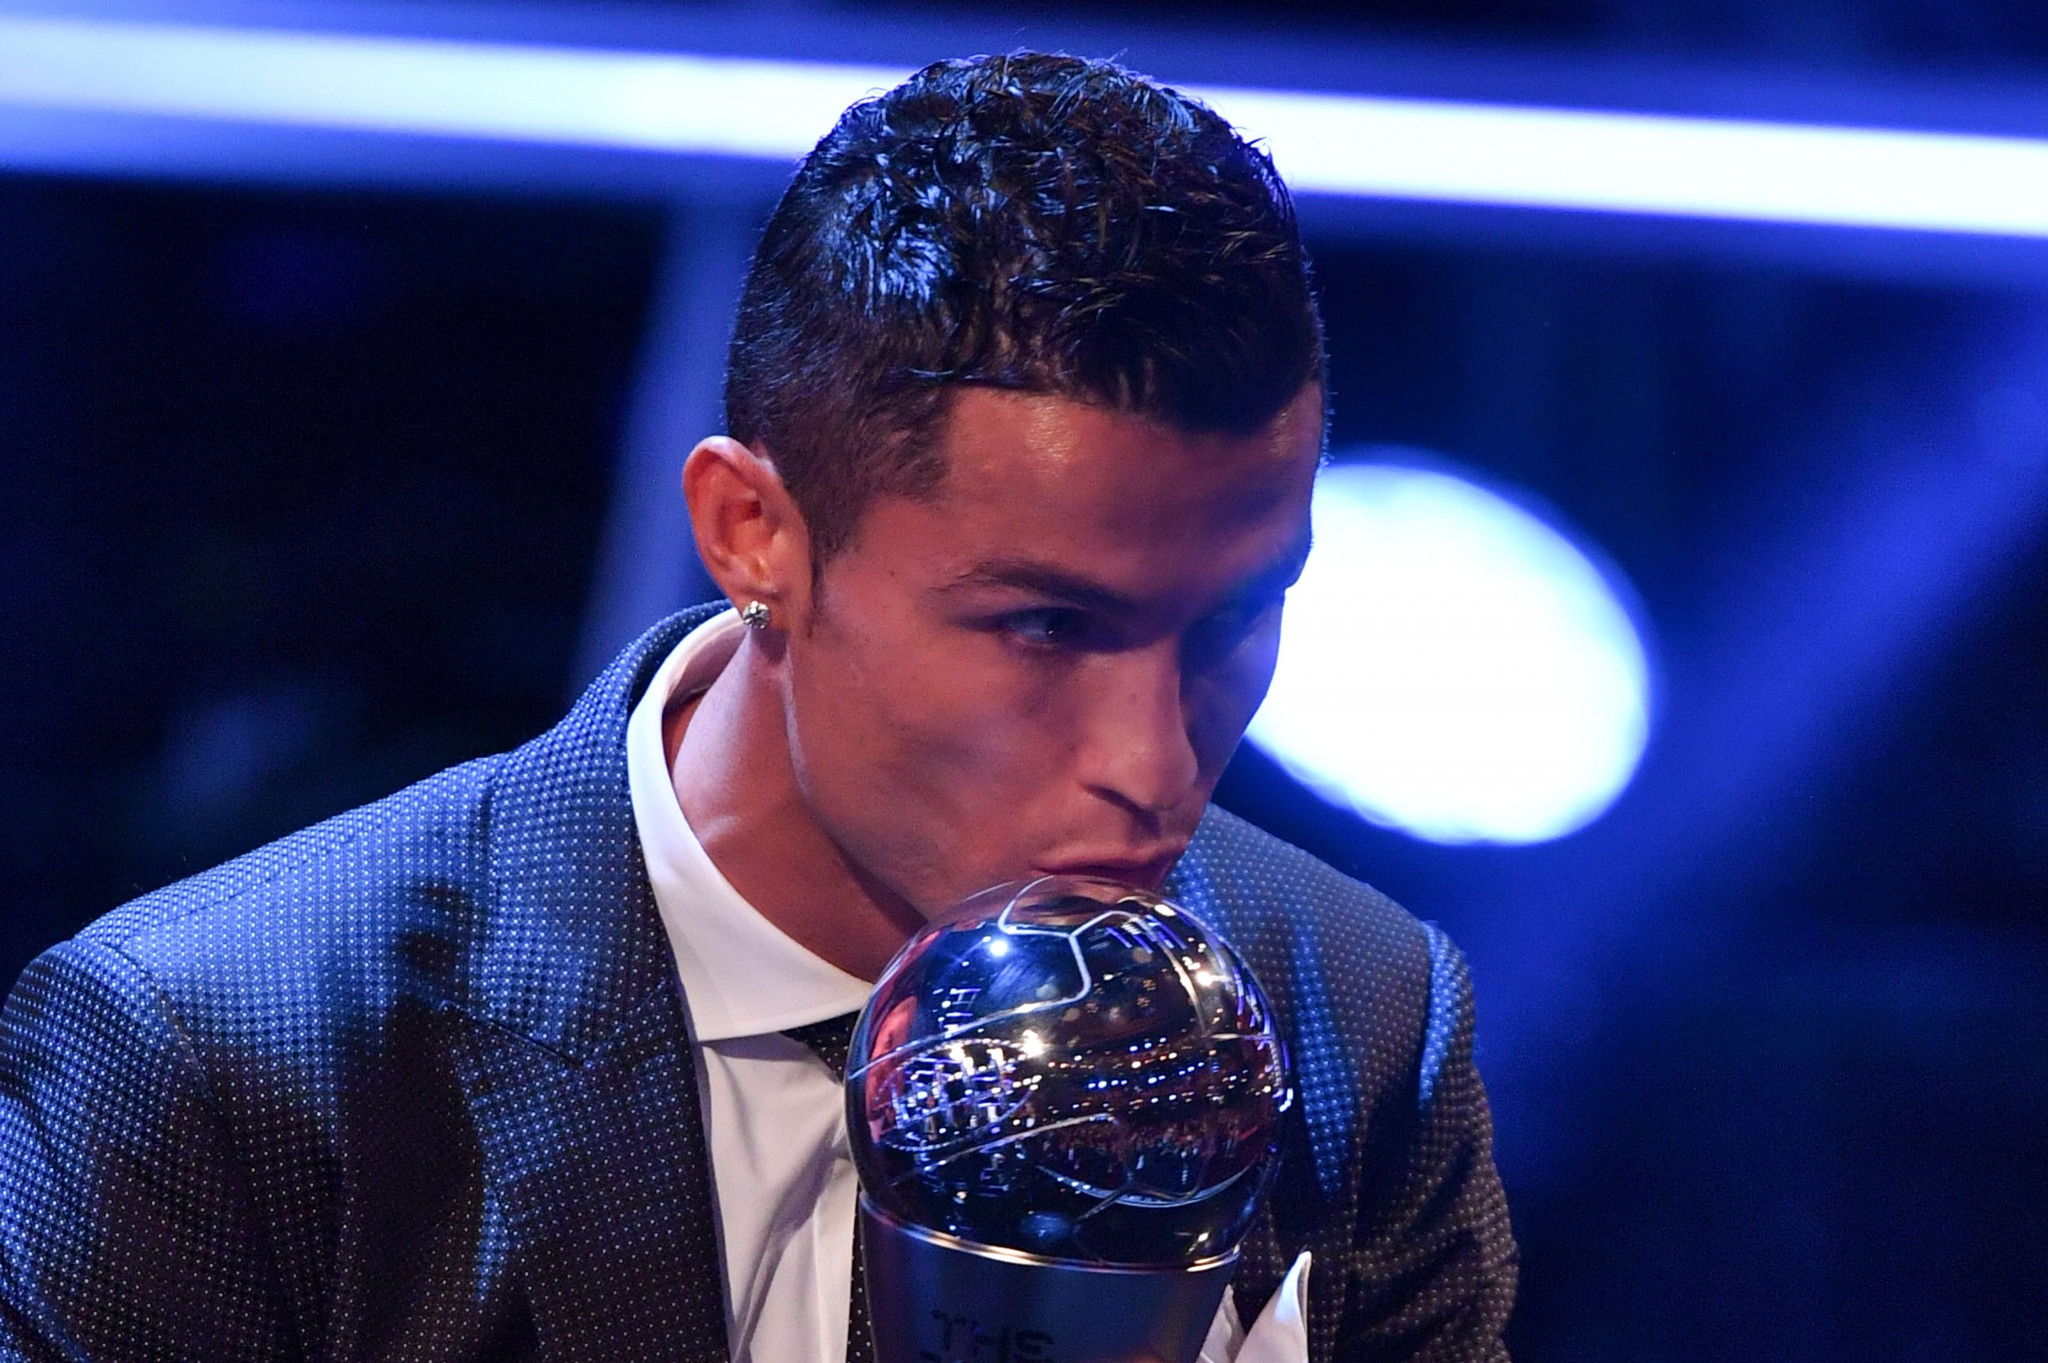 Cristiano Ronaldo won his second consecutive Best FIFA Men's Player Award ©Getty Images